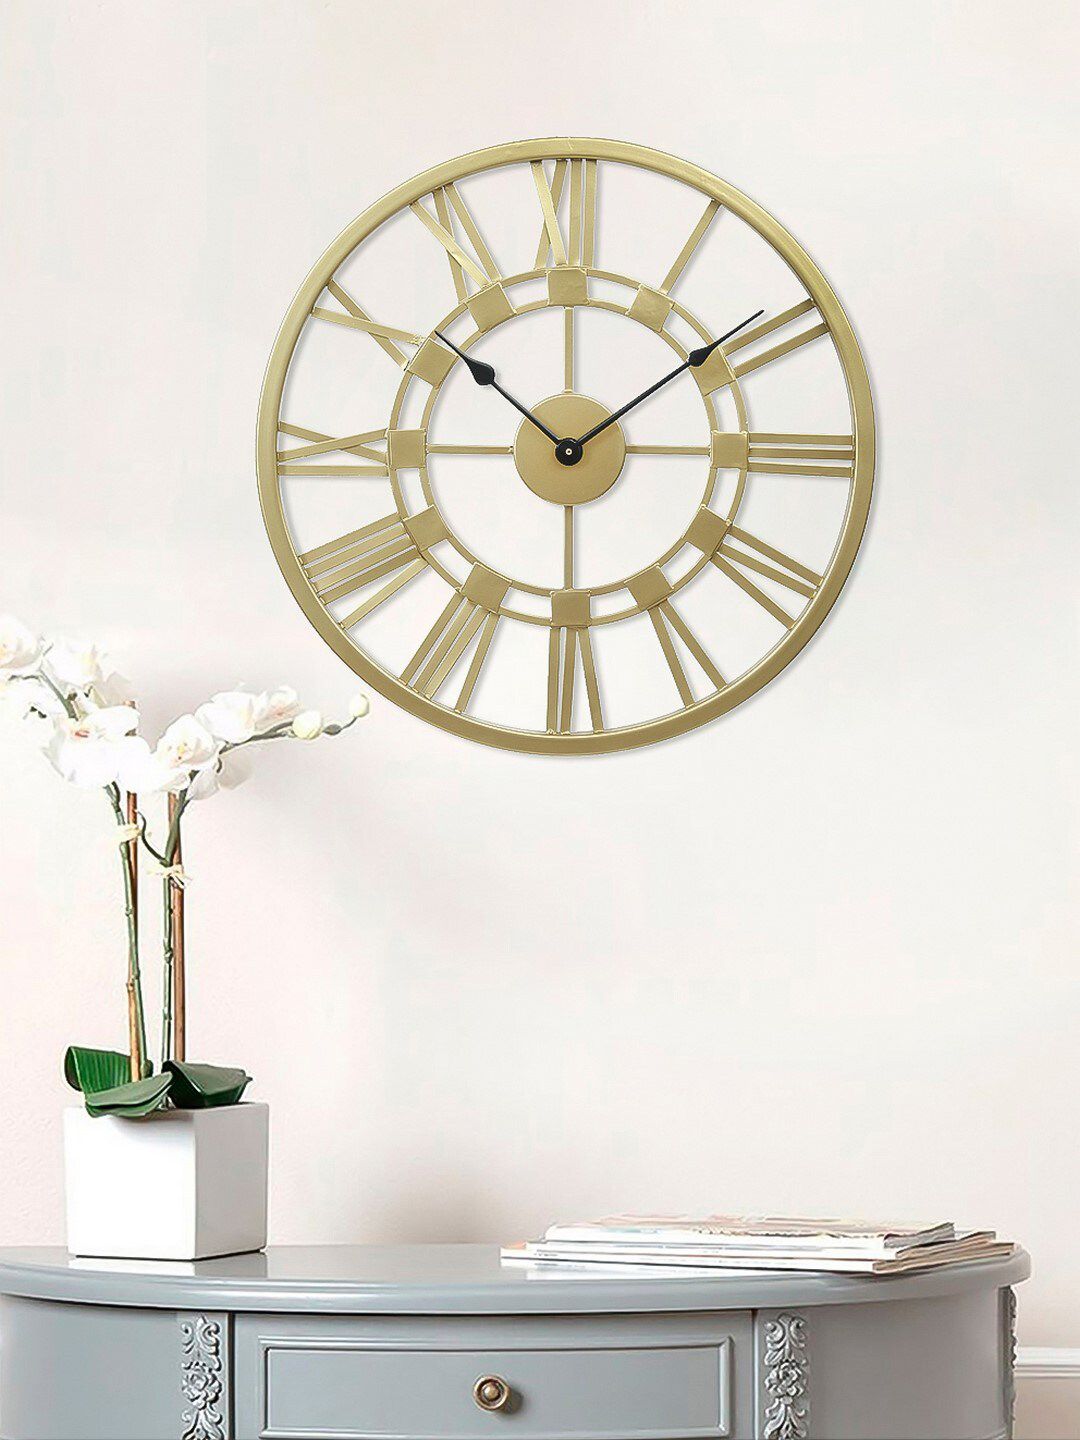 eCraftIndia Gold-Toned Handcrafted Round Solid Analogue Wall Clock Price in India